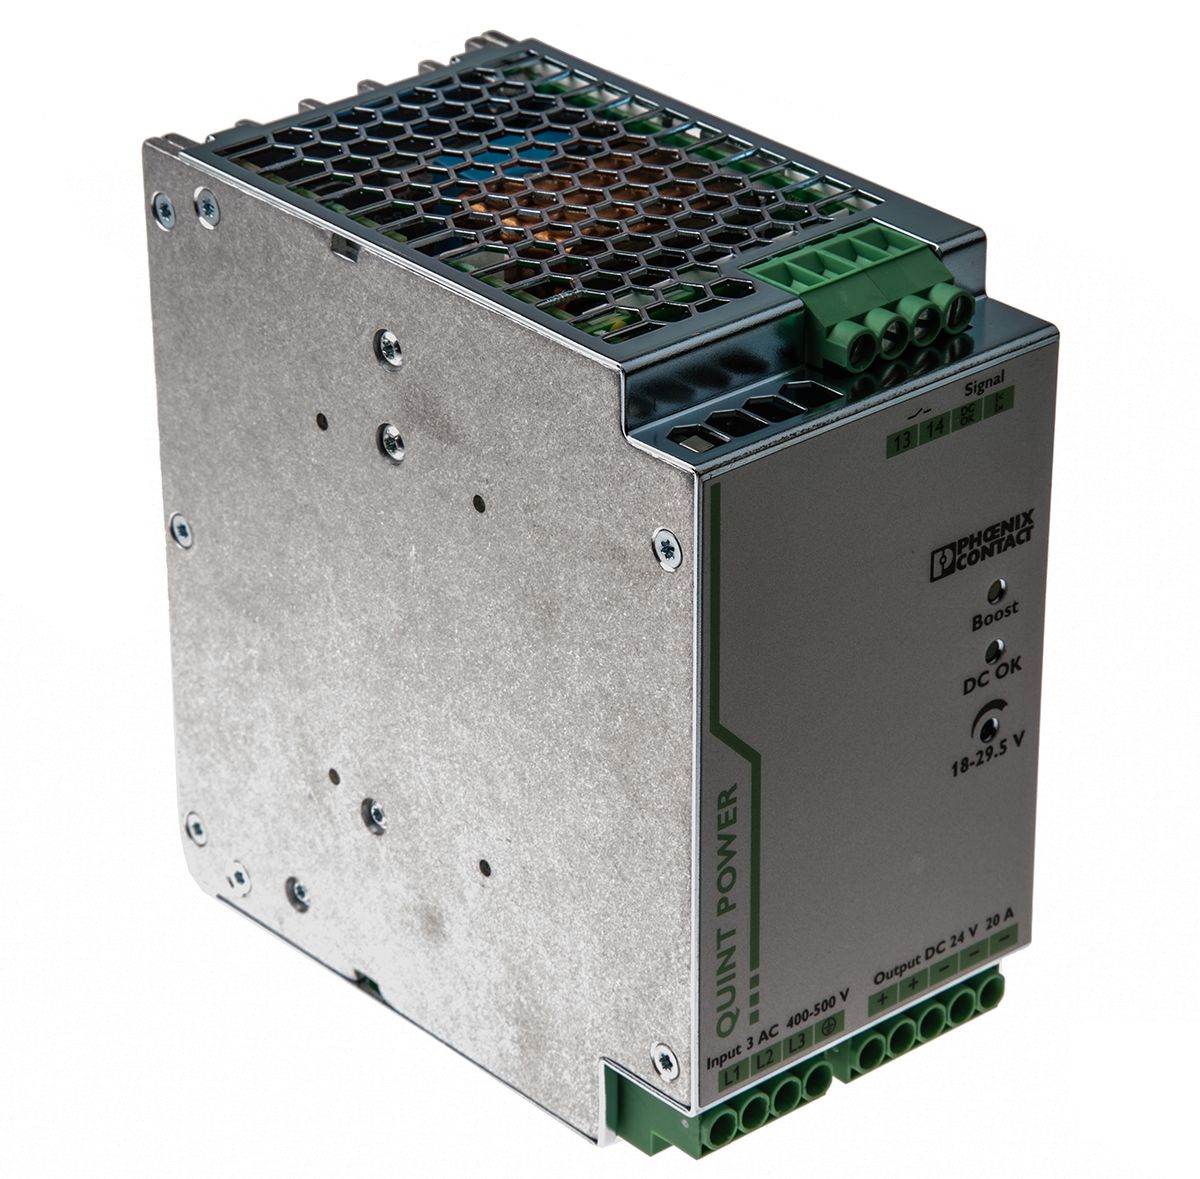 Phoenix Contact QUINT-PS/3AC/24DC/20 Switch Mode DIN Rail Power Supply 400V ac Input, 24V dc Output, 20A 480W